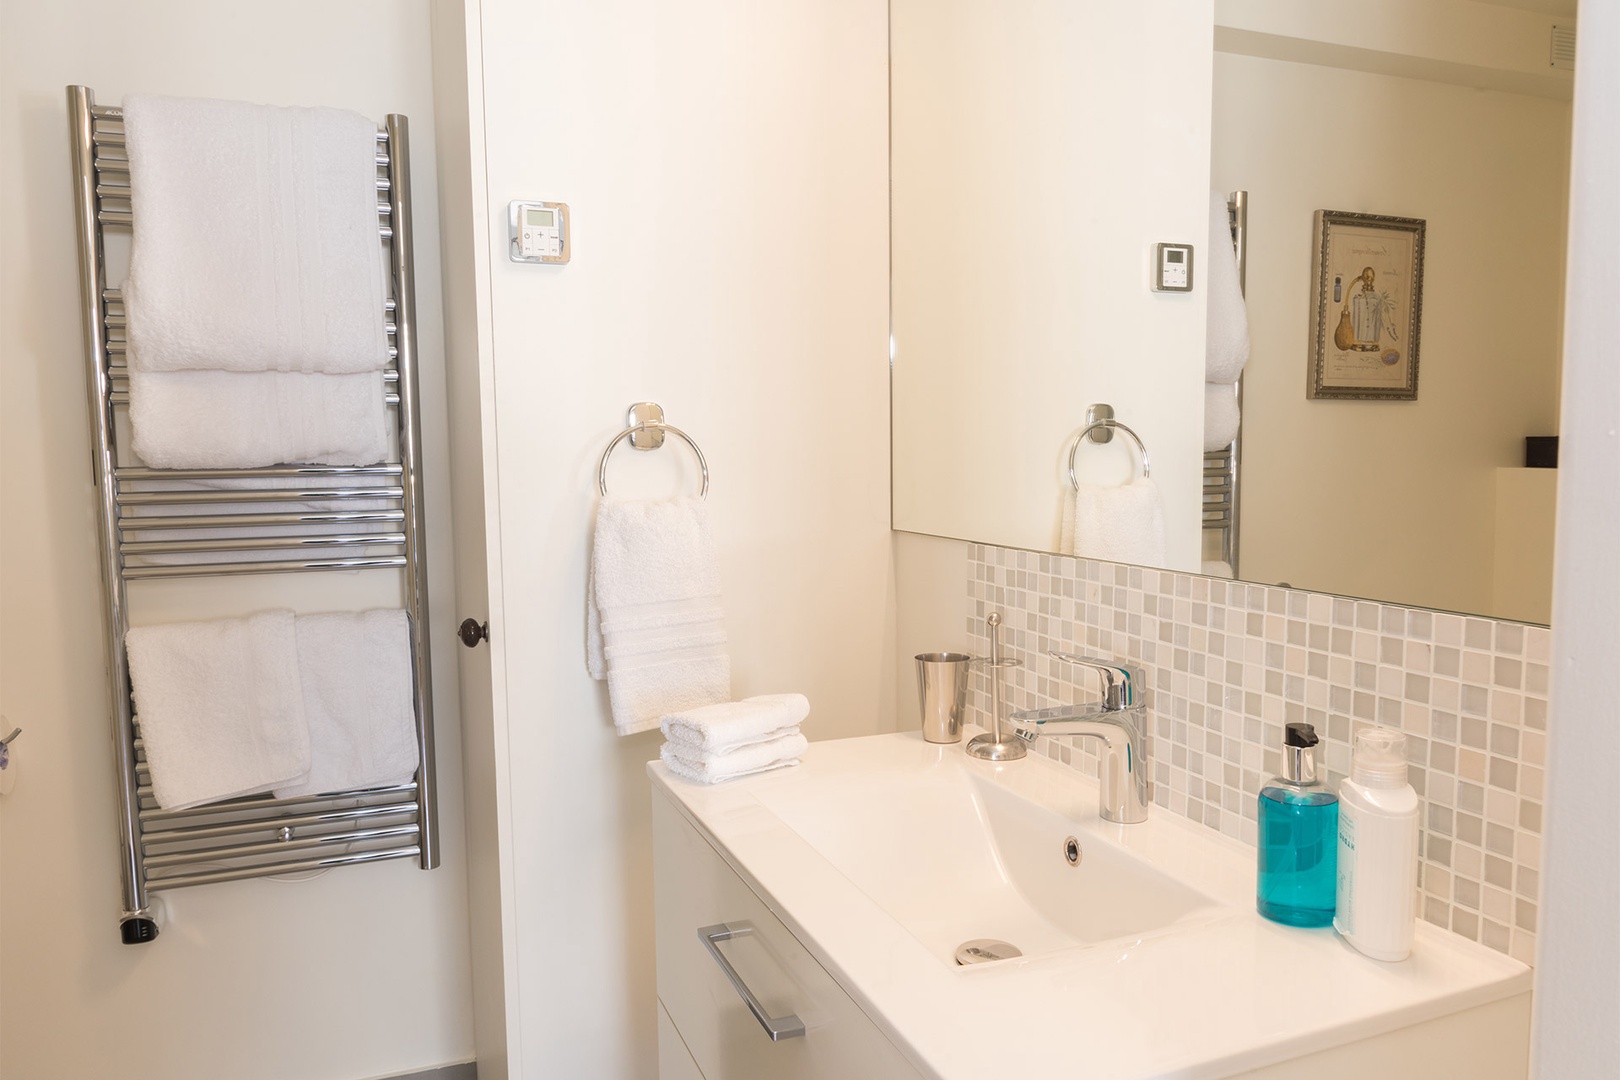 The stylish bathroom comes with a large and comfortable shower.